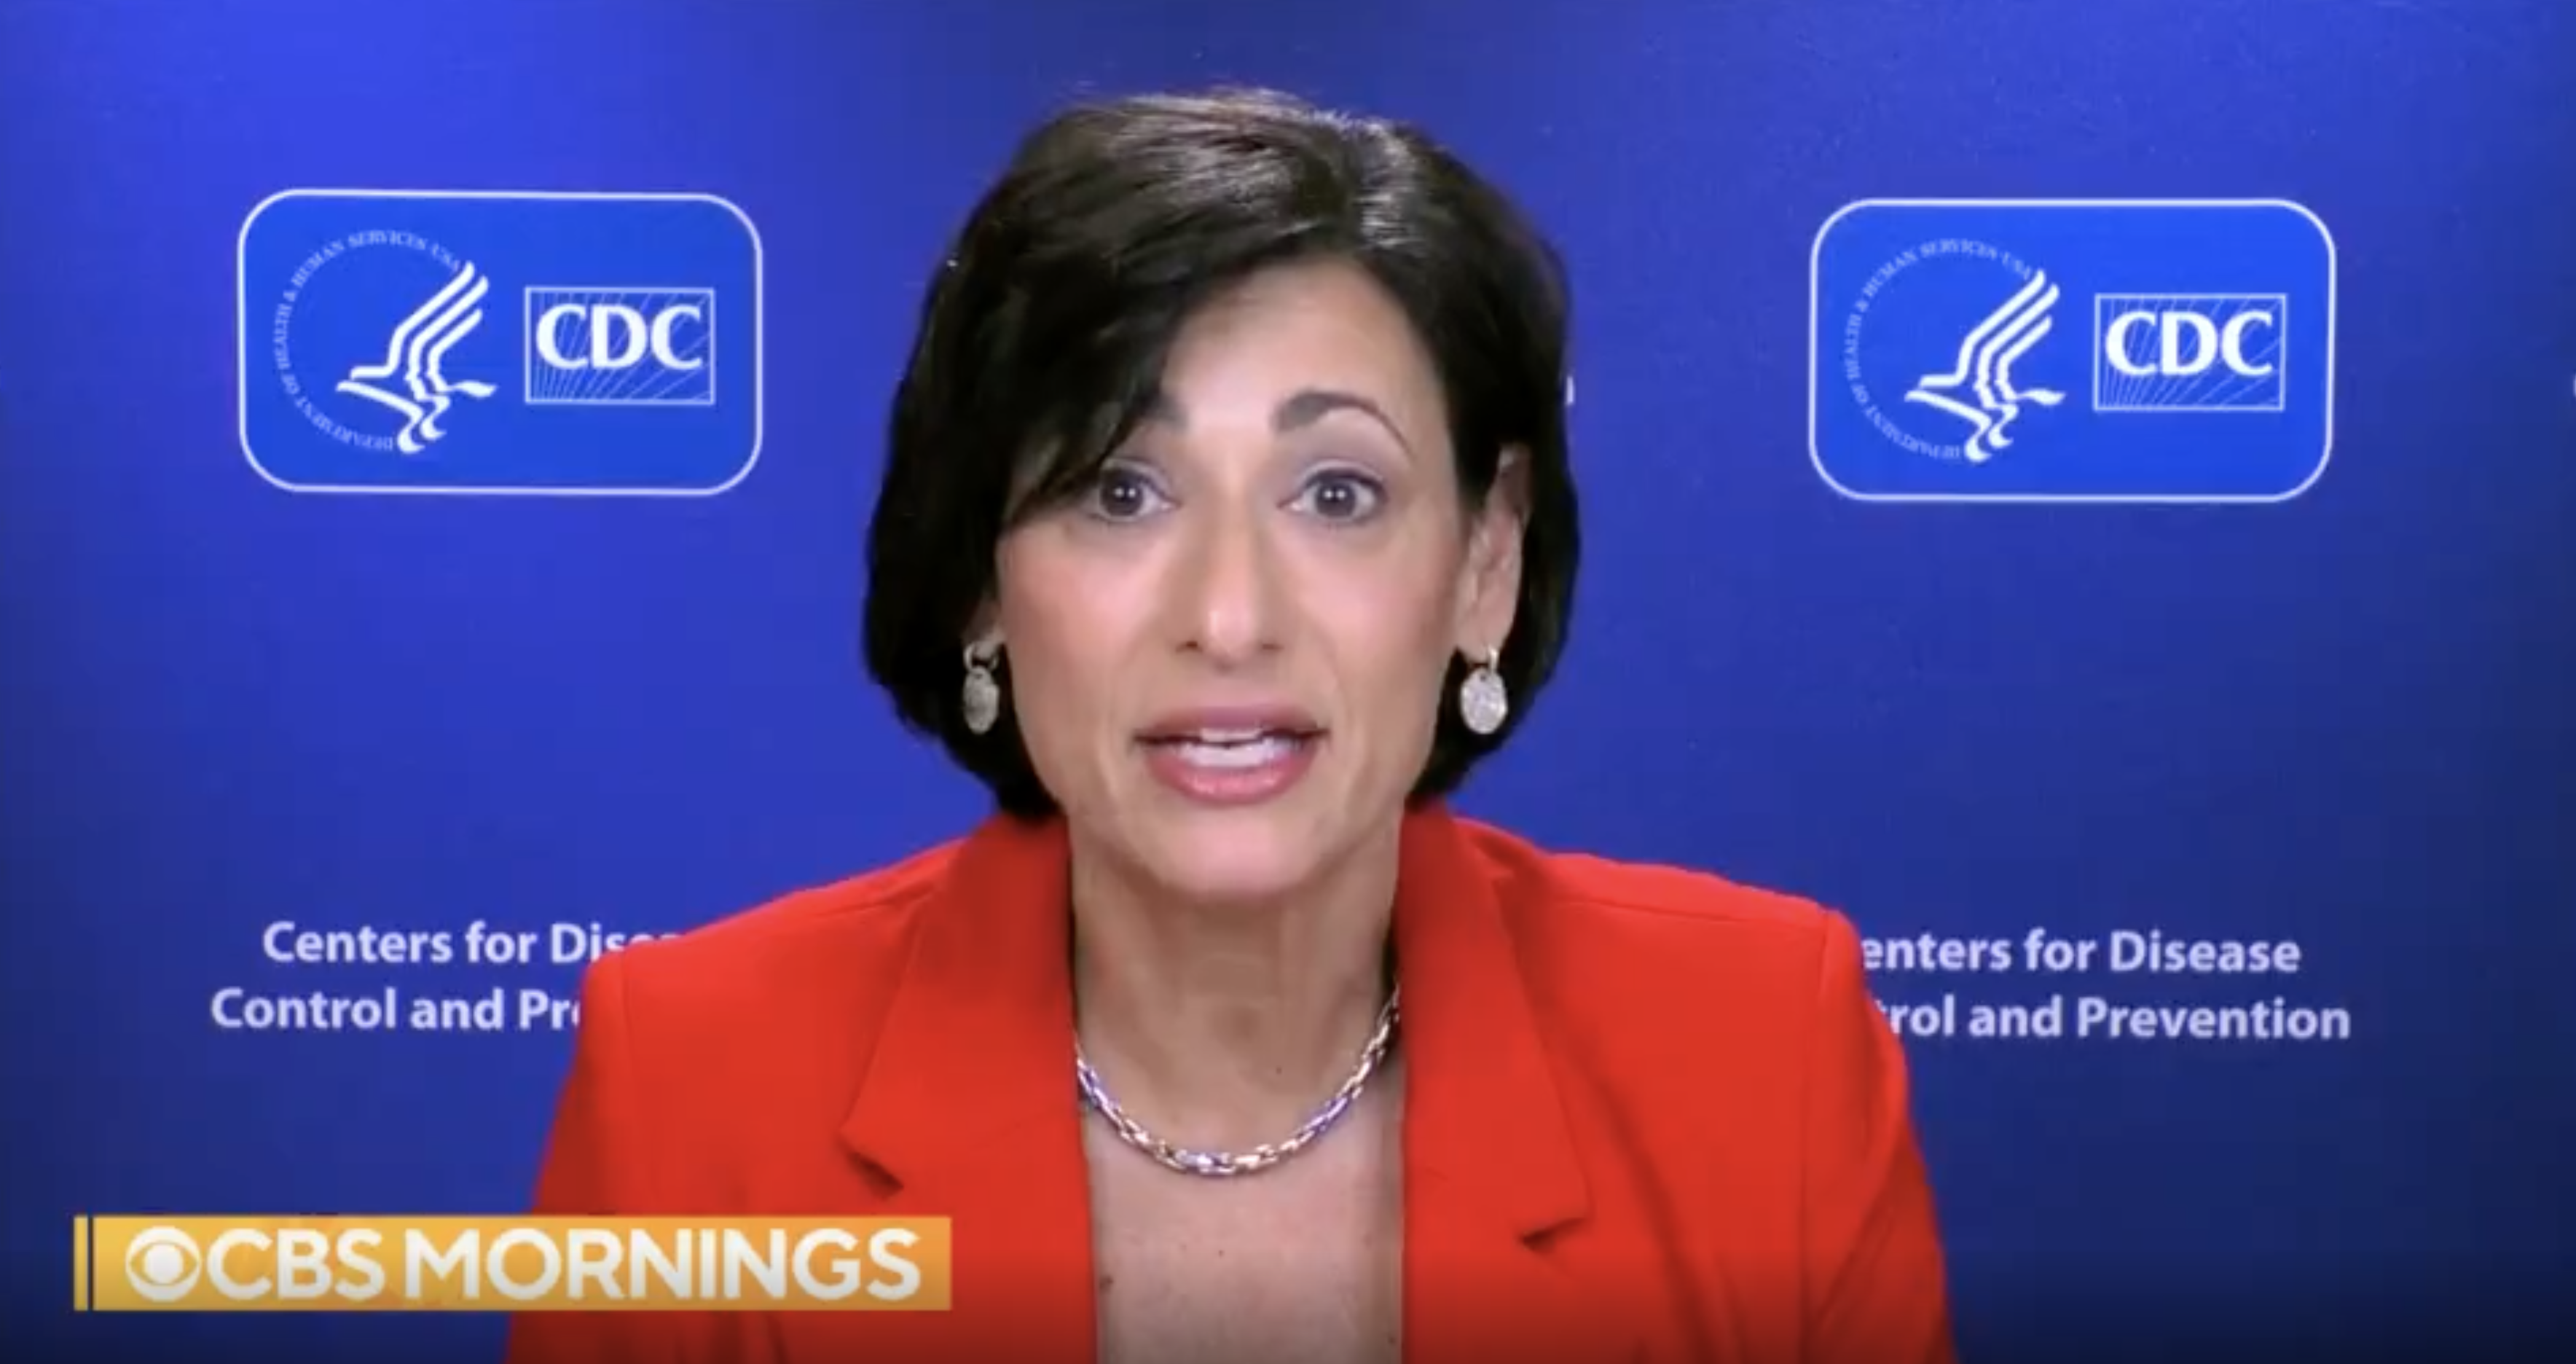 Dr. Rochelle Walensky, director of the US Centers for Disease Control and Prevention, talks to CBS Mornings on Friday 7 January 2022